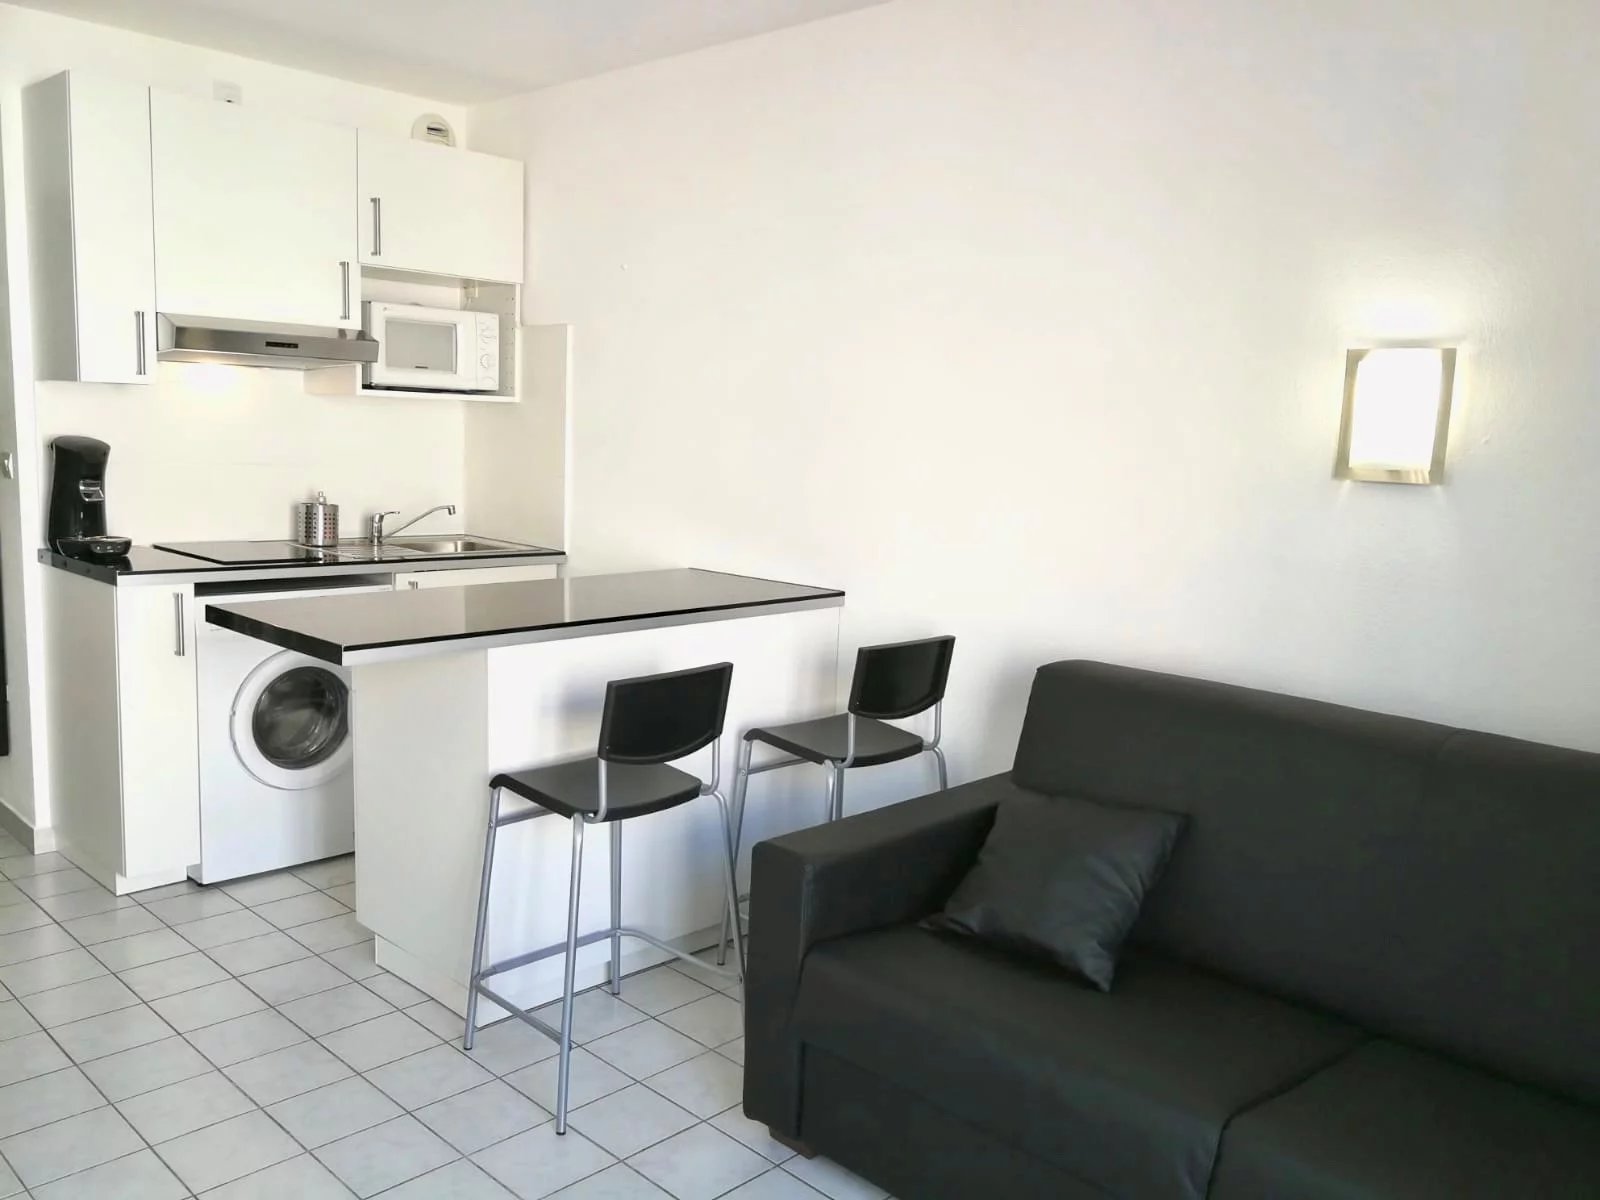 Vente Appartement 18m² à Nice (06000) - Agence Du Ray